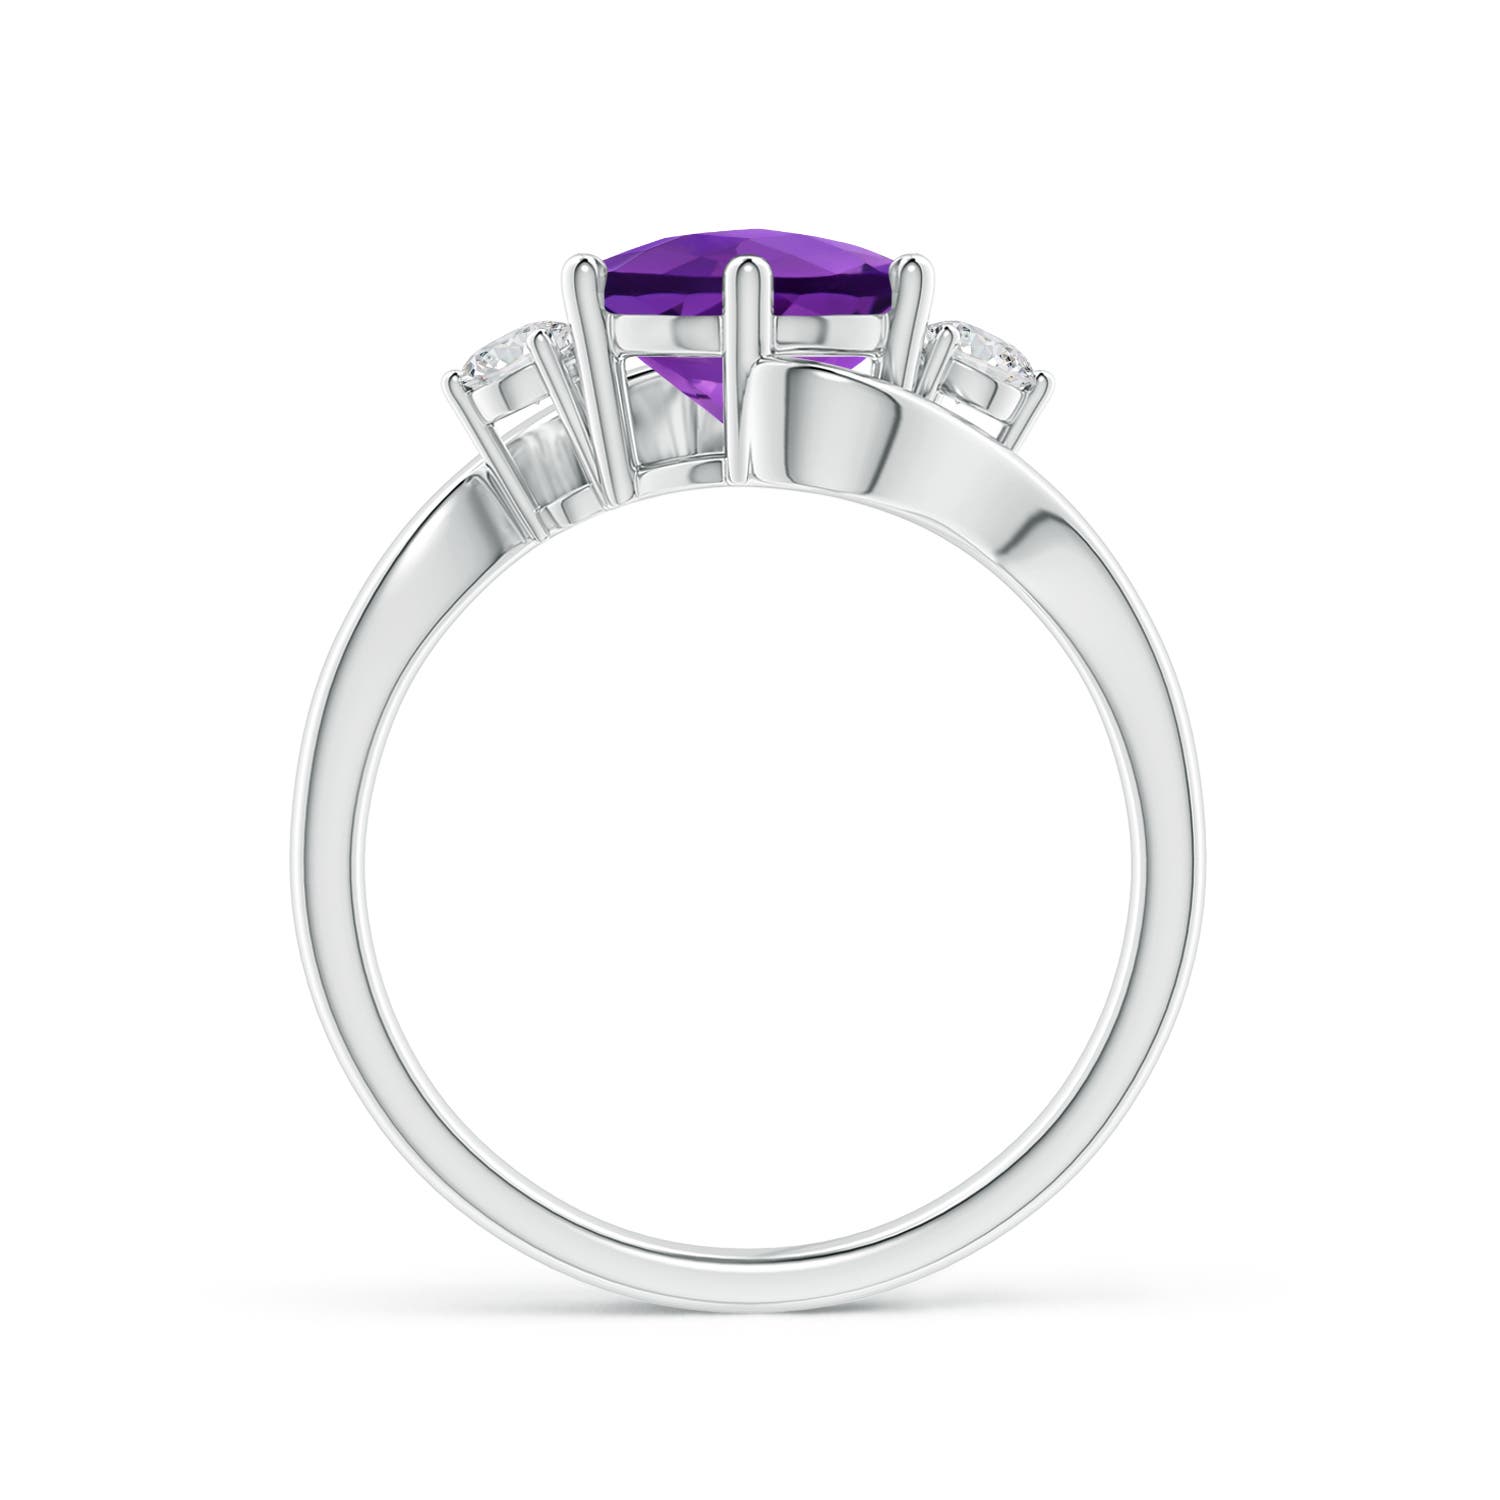 AAA - Amethyst / 1.84 CT / 14 KT White Gold